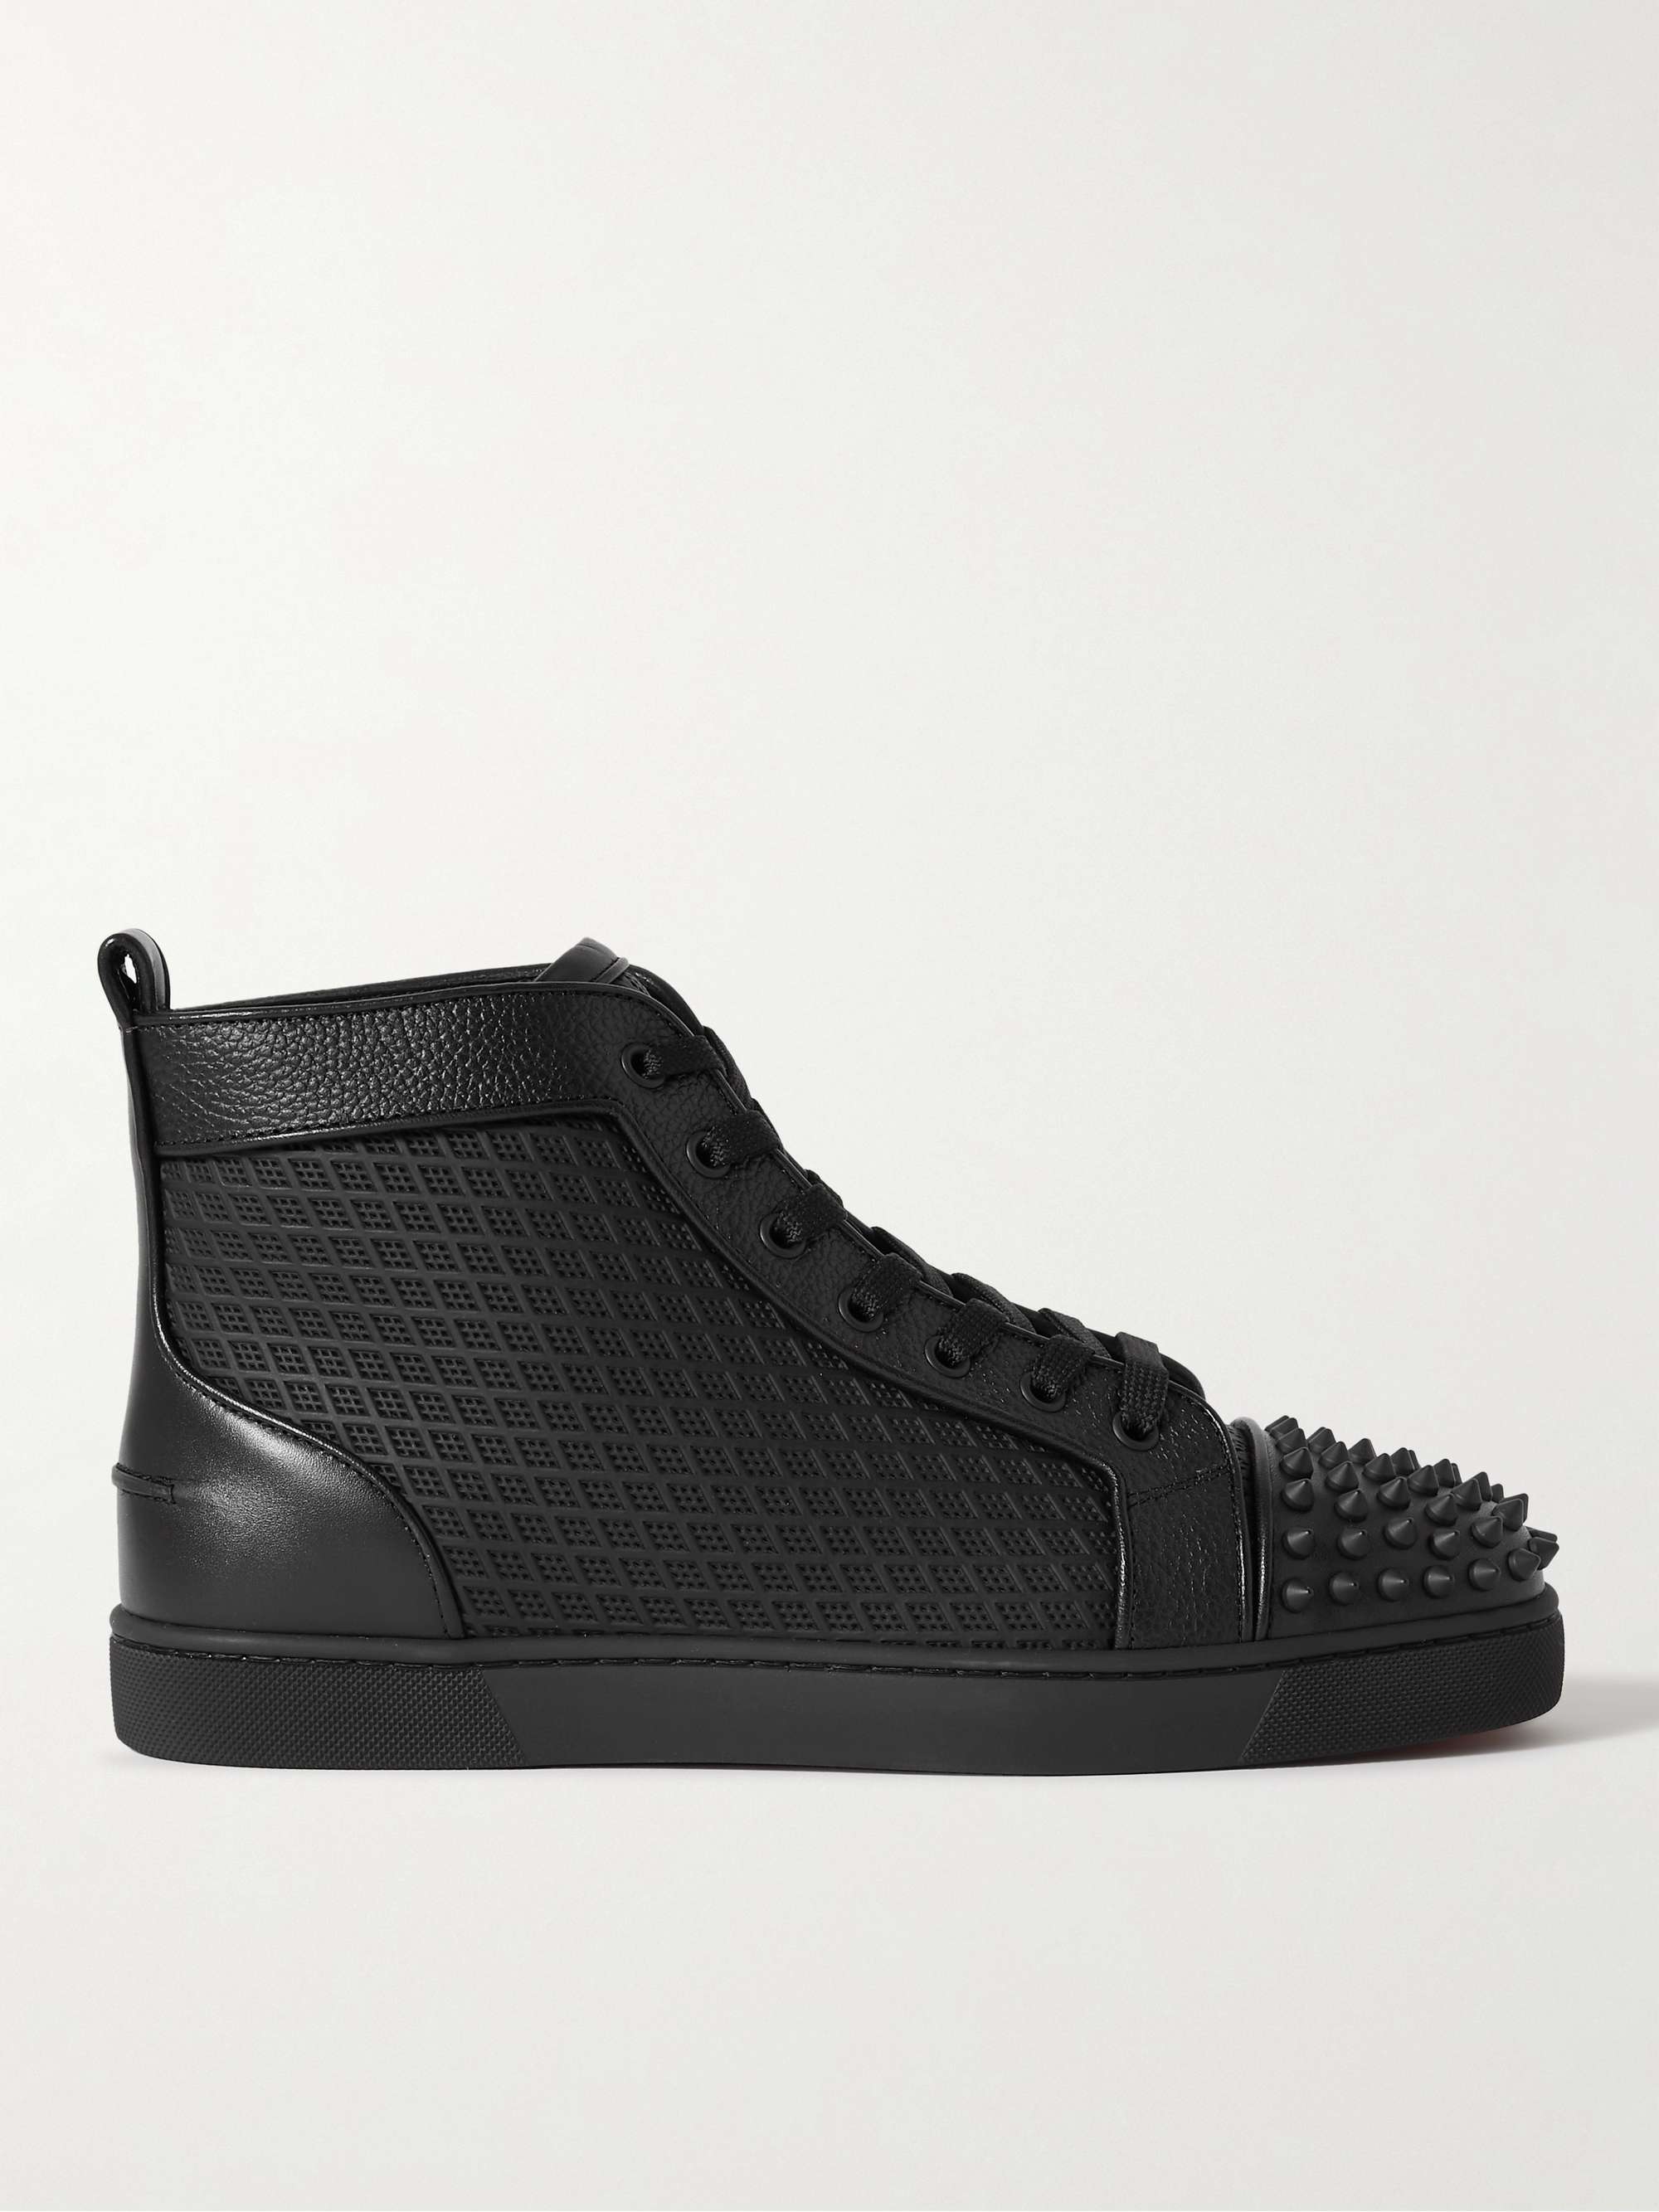 CHRISTIAN LOUBOUTIN Lou Spikes Orlato Studded Leather and Mesh High-Top  Sneakers | MR PORTER